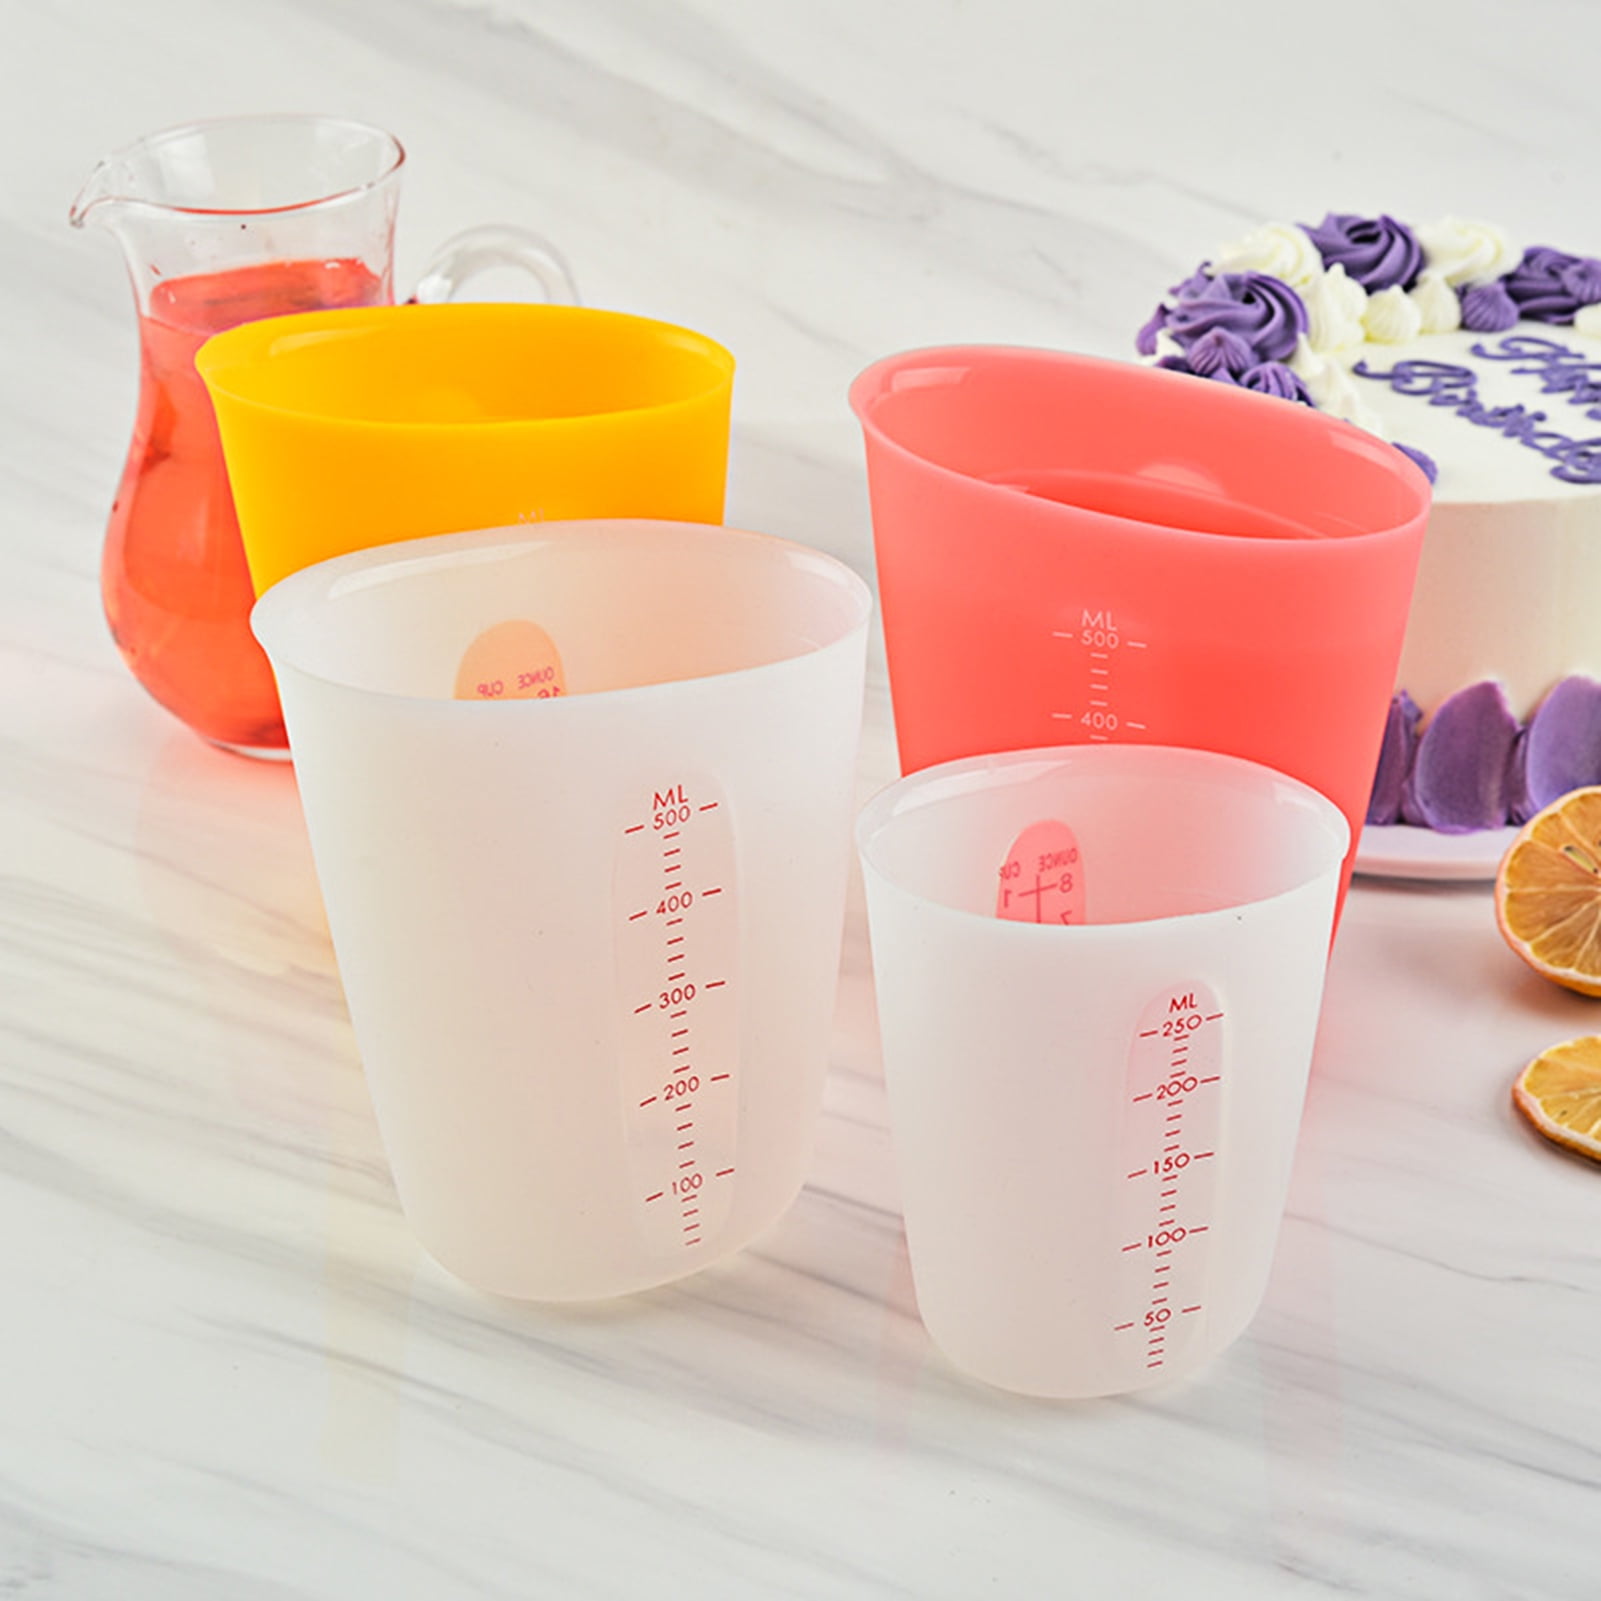 Non-Slip Juice Cup - Smooth Edge, Easy to Clean Silicone Measuring